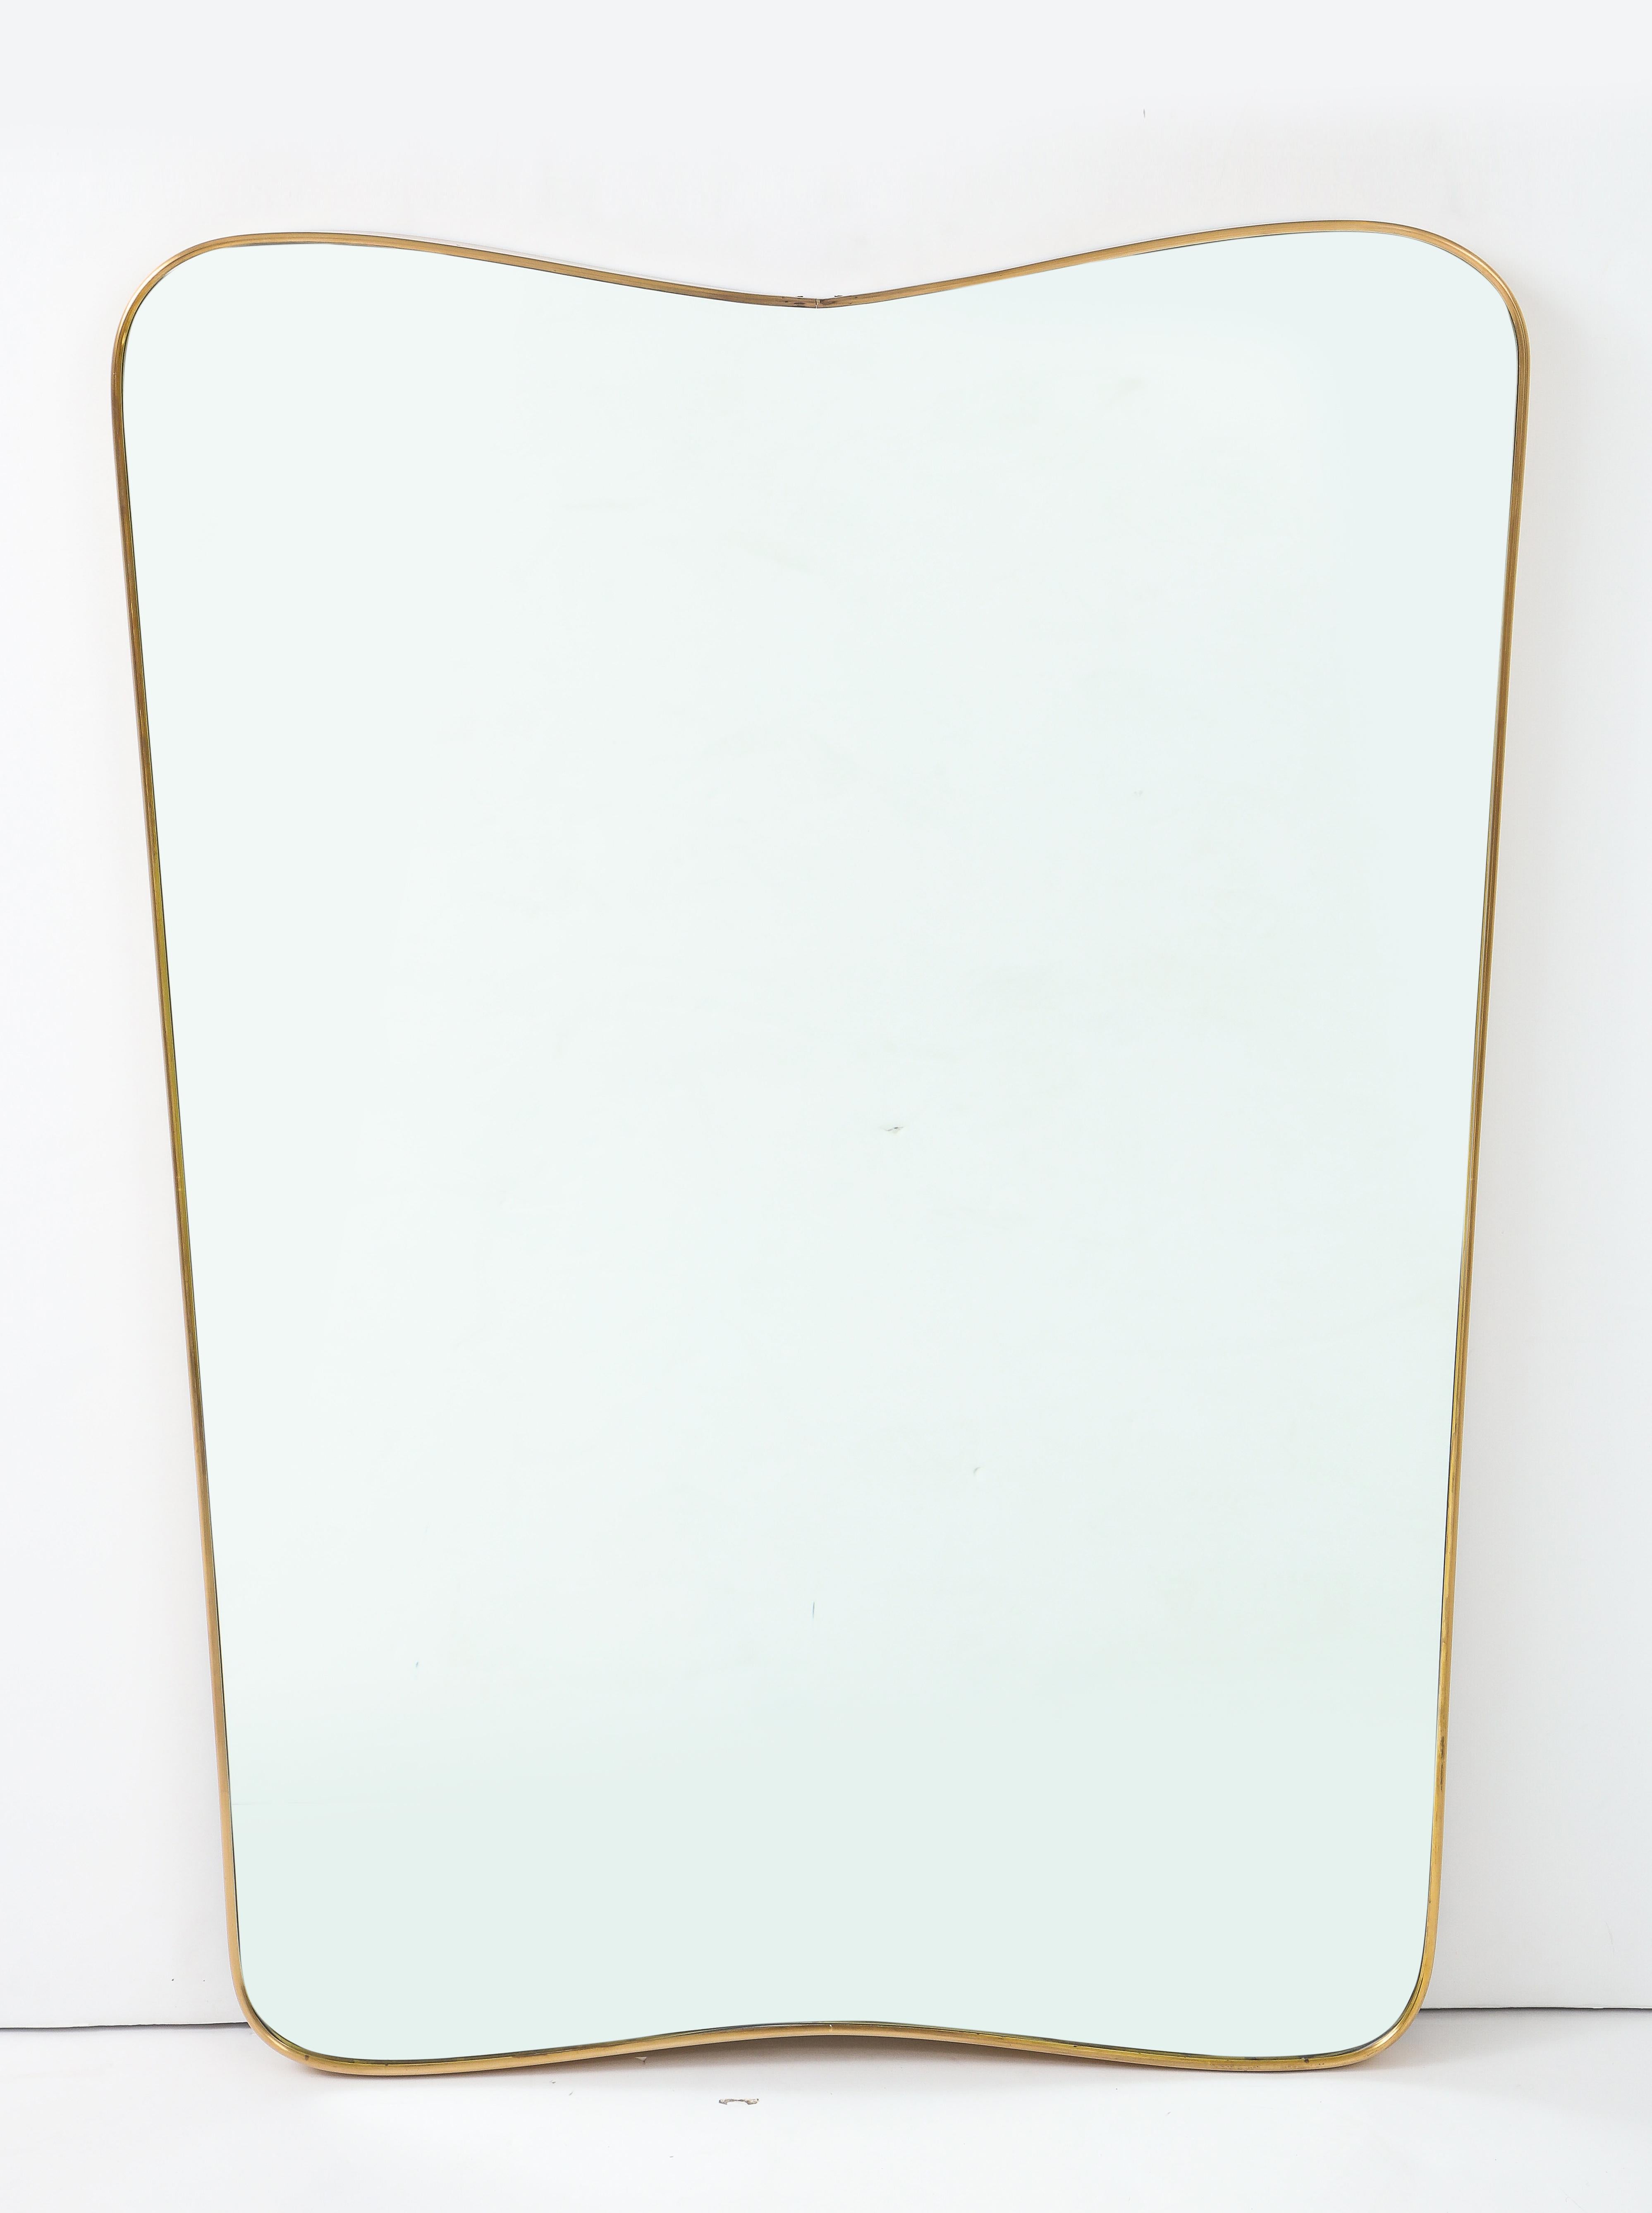 This midcentury Italian solid un-lacquered brass mirror carries a more unique modified shield shape form and is its depth is much deeper than those seen in general lending a bolder more substantial presence. It’s solid wood back is original.
Date: